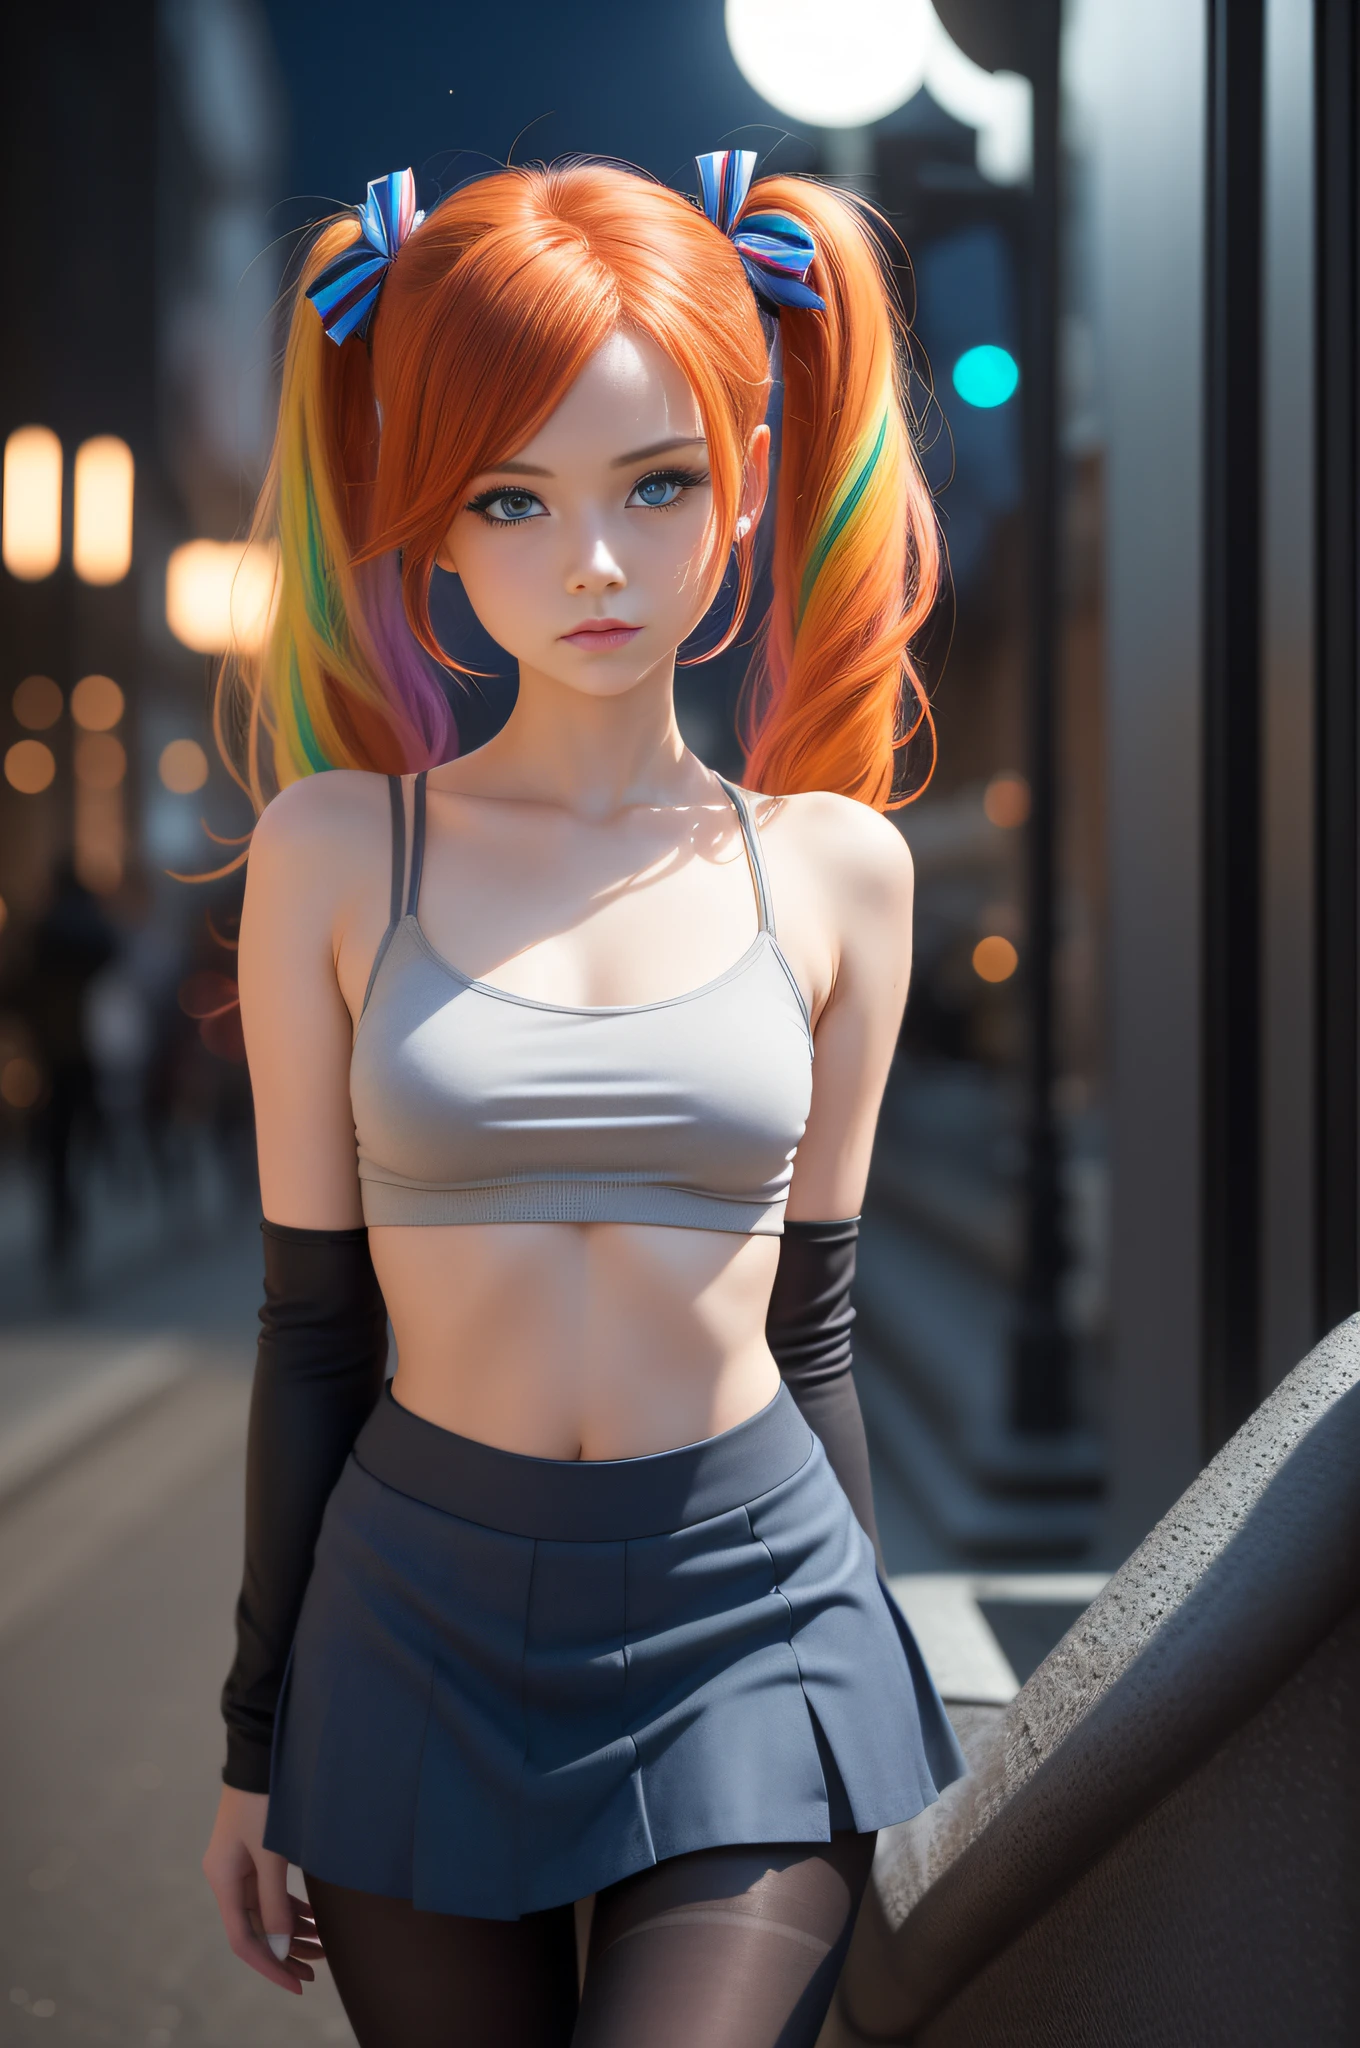 1 girl, solo, (nsfw), cute redhead 18-year-old girl in twin tails, ((perfect female body)), (cute face make up), multiple (rainbow colored hair: 1.2), (beautiful detailed blue eyes: 1.6), (photo realistic eyes: 1.6), happy, Ukrainian, (petite body), ((small hips)), pale white skin, (mini skirt and tube top), (matte pantyhose: 1.6), ("blade runner" style background}, (night time), photo realistic.